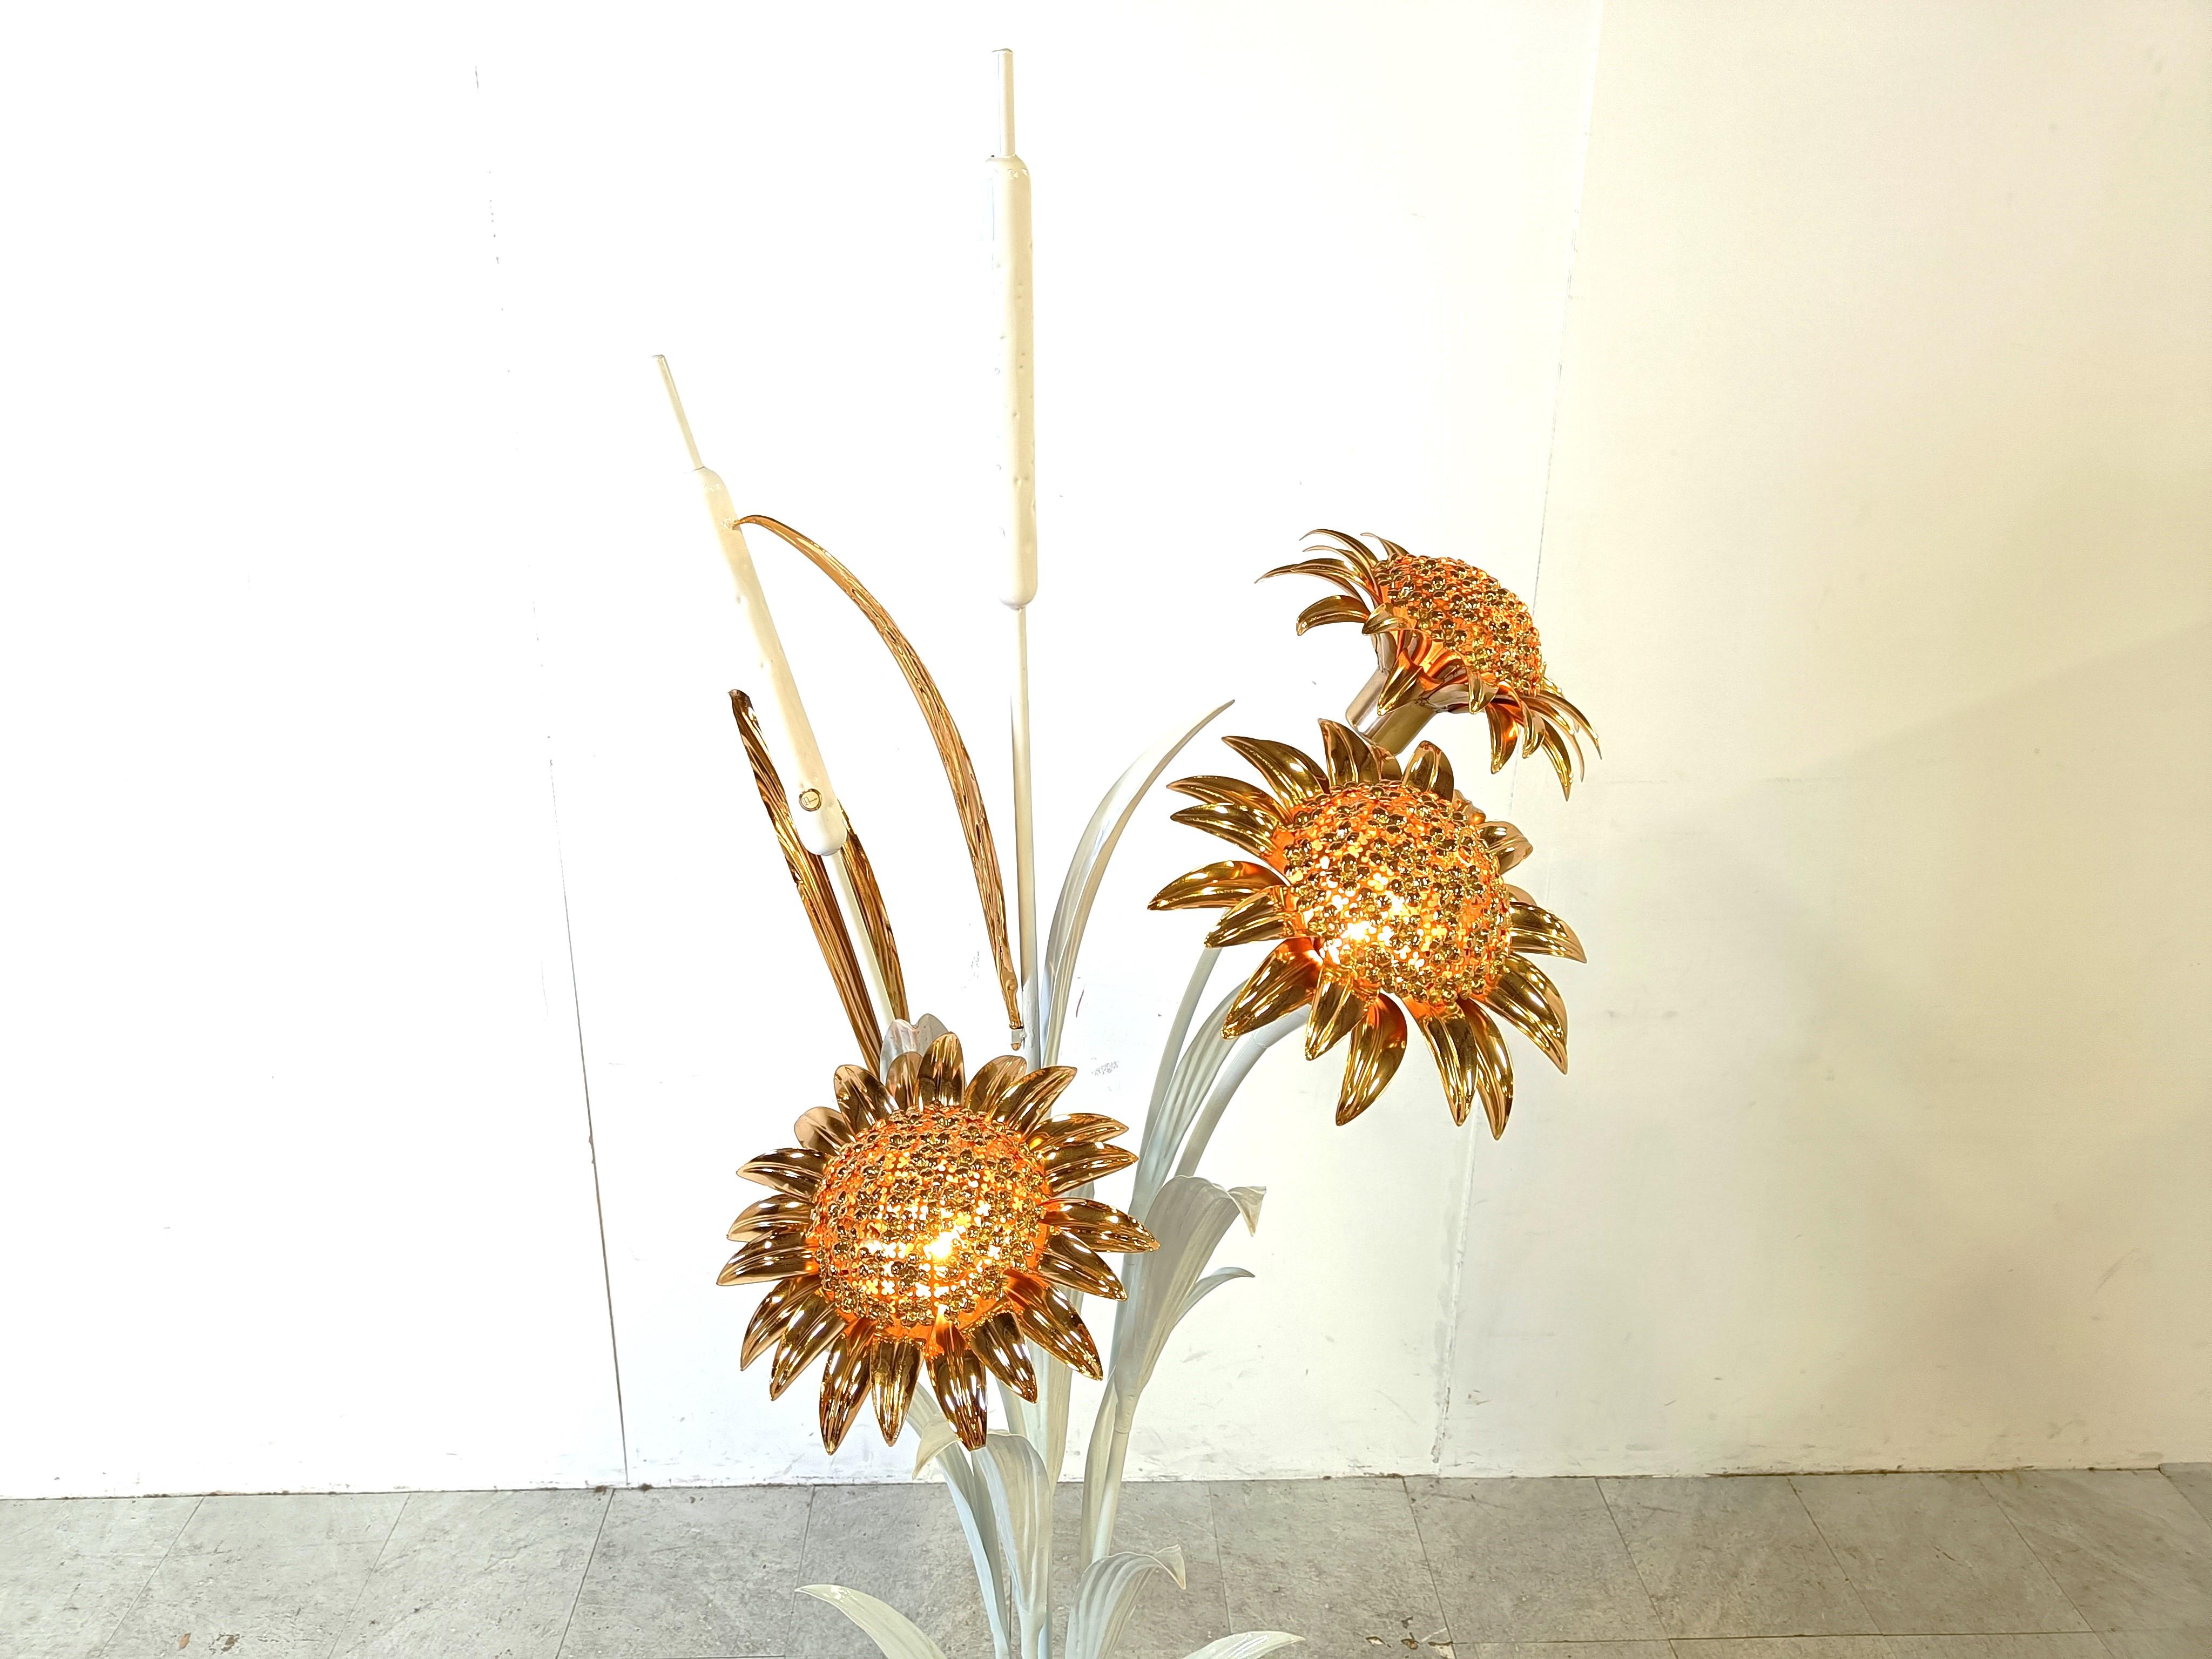 Striking and large floor lamp by Hans Kögl consisting of a white lacquered metal base with a sheaf of wheat design and very detailes brass leafs and sunflowers.

The sunflowers have integrated lights to create a fantastic dimmed light effect.

It